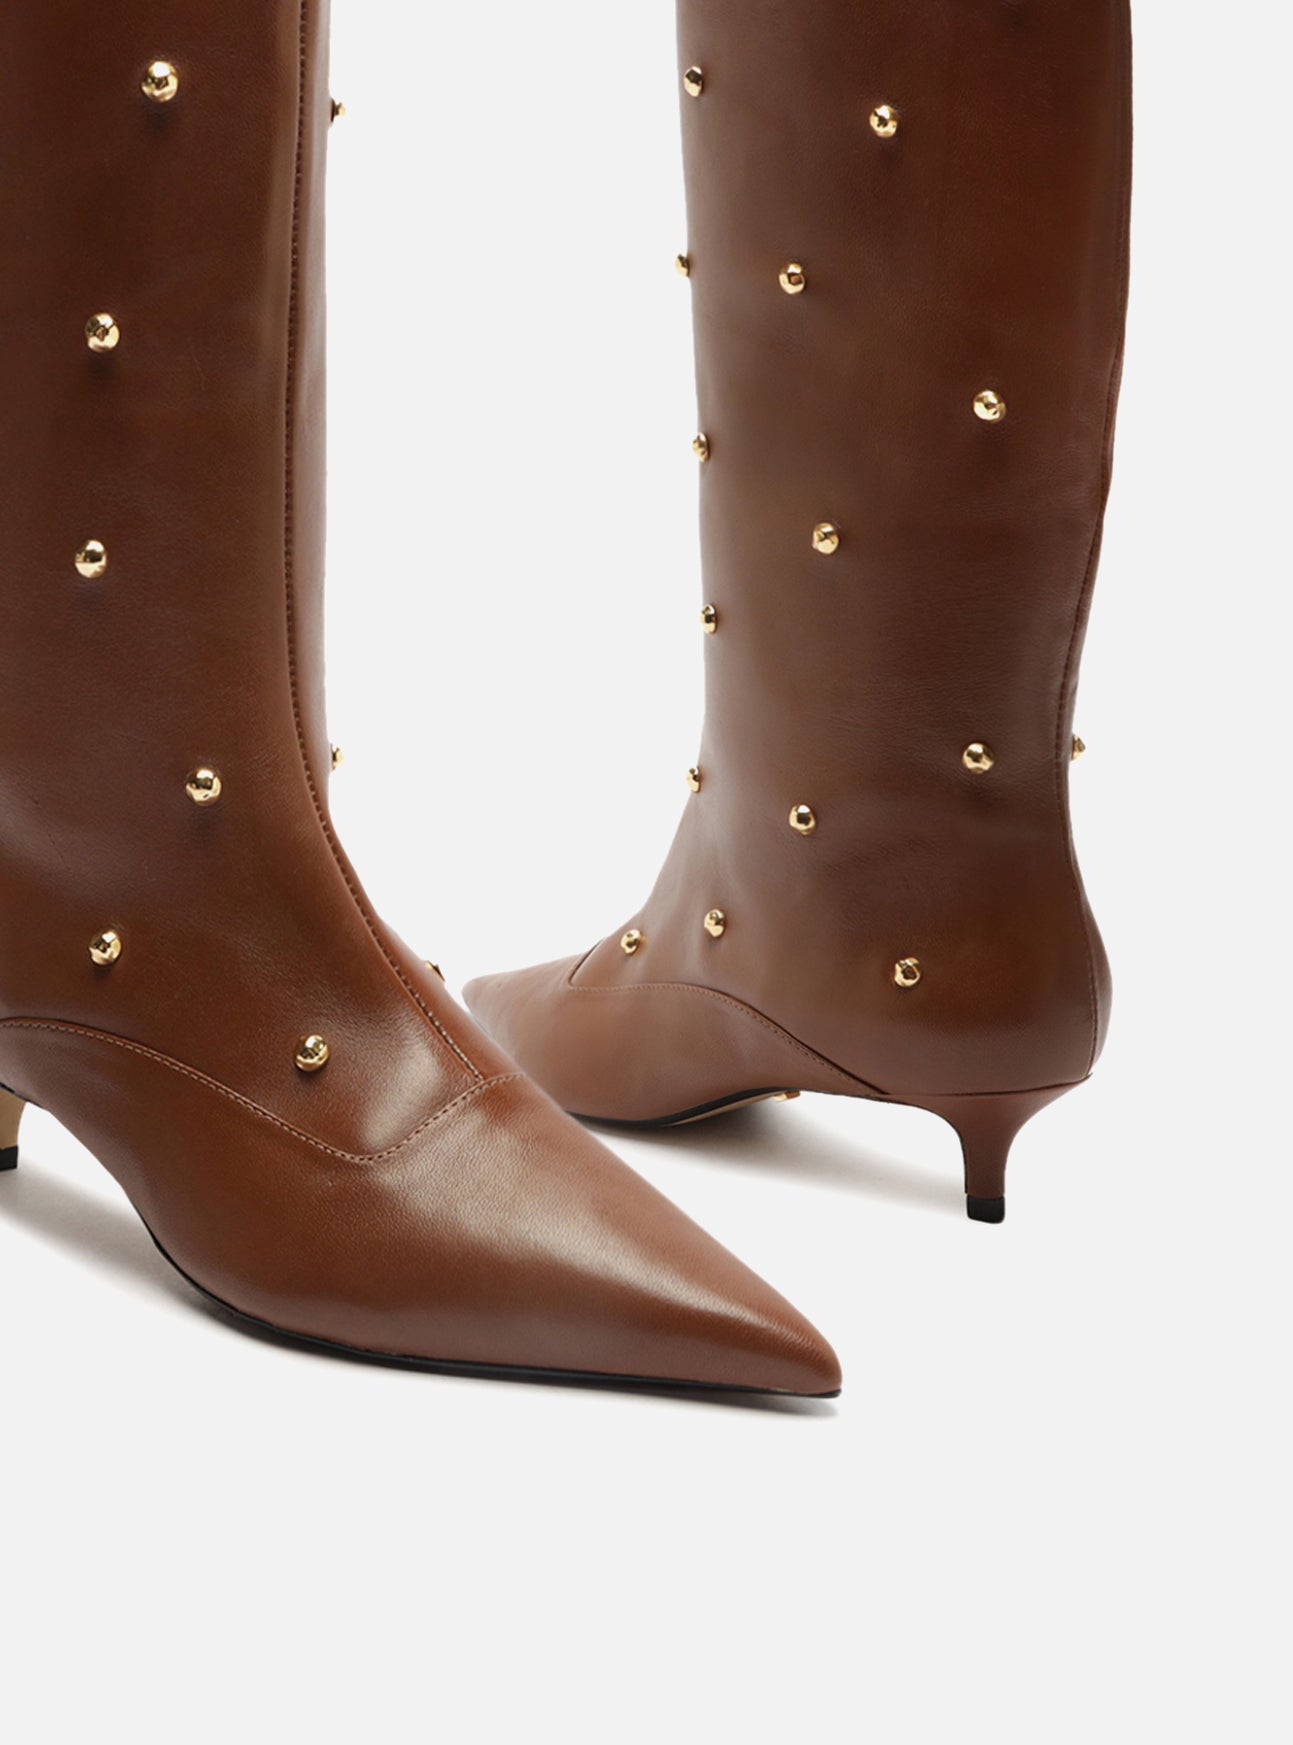 The Campaign Leather Boot